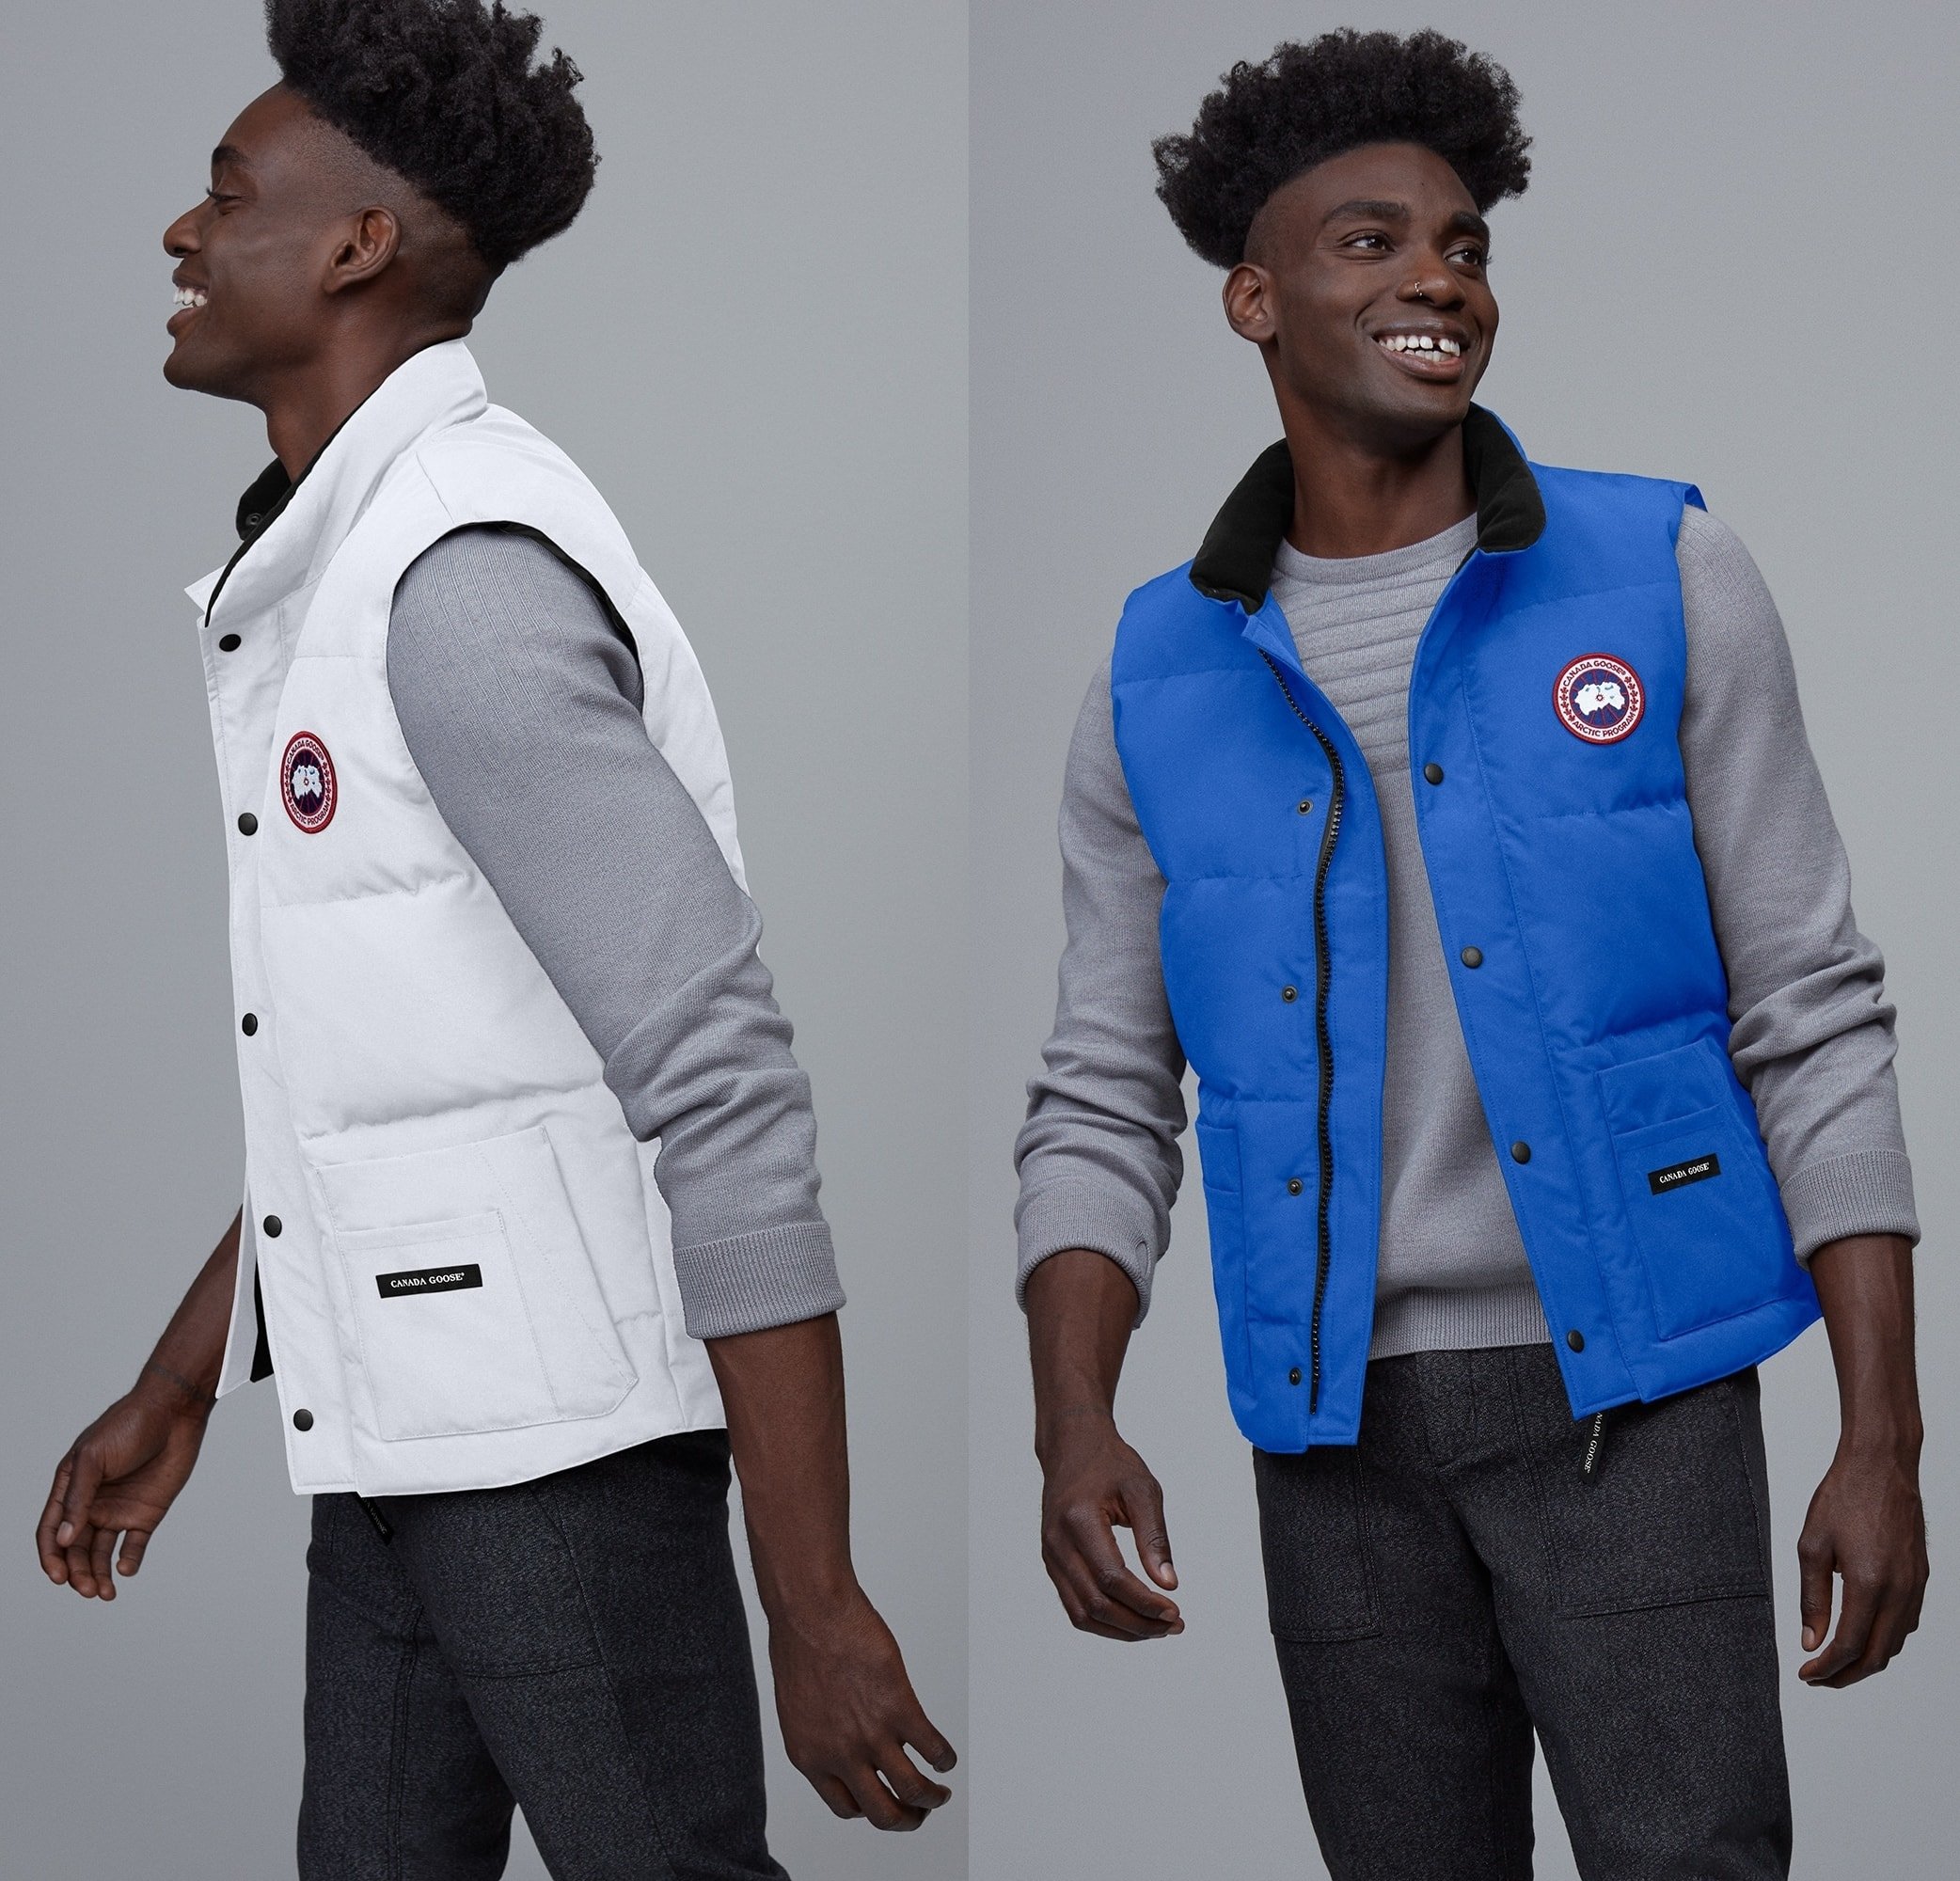 Casual down vest with a well-insulated layer for cold days spent about town